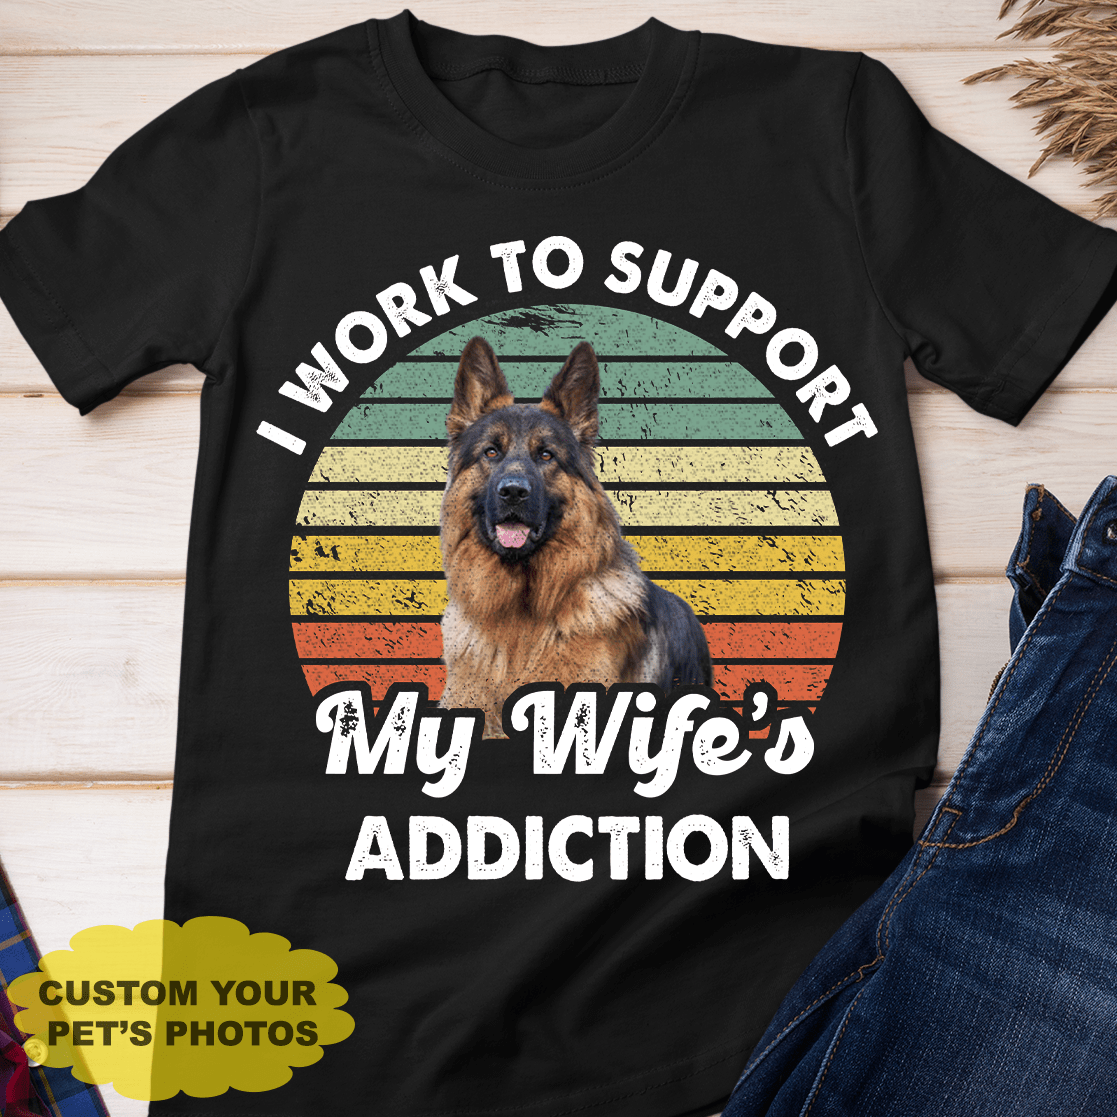 GeckoCustom Personalized Custom Dog Shirt, I Work To Support My Wife's Addiction, Gift For Dog Lover Unisex T Shirt / Black / S